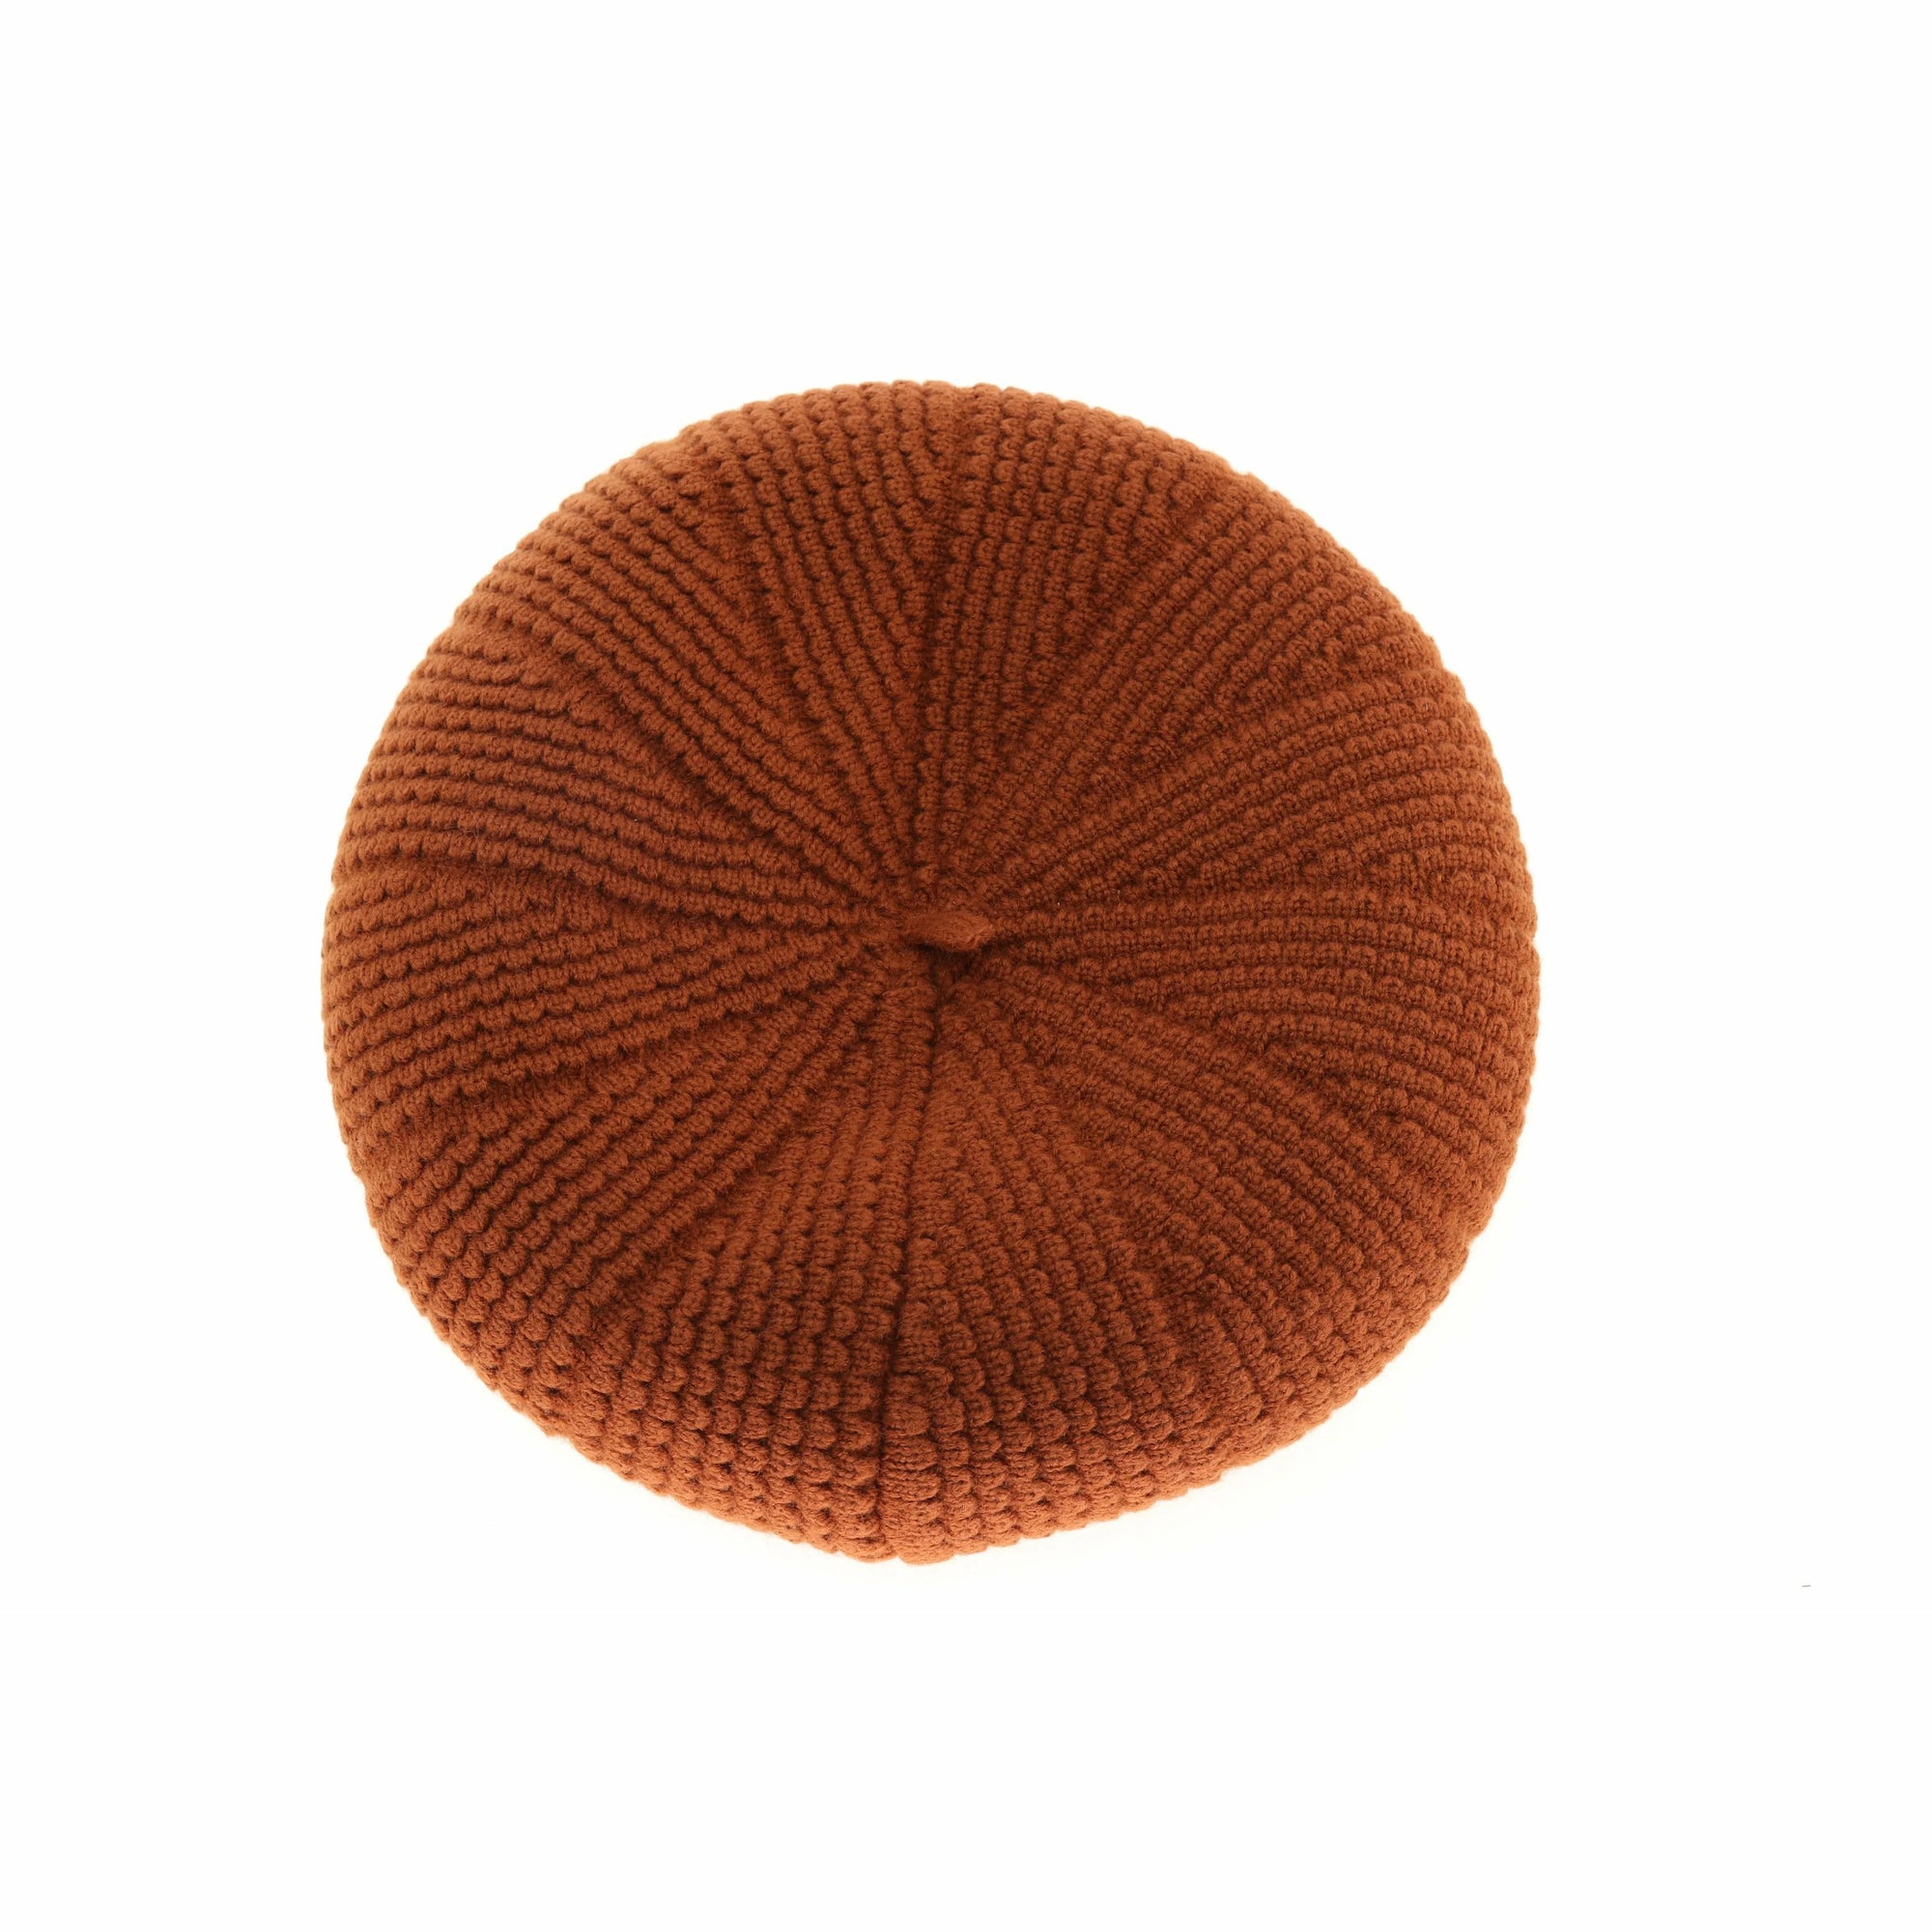 Scalloped Beret in Rust